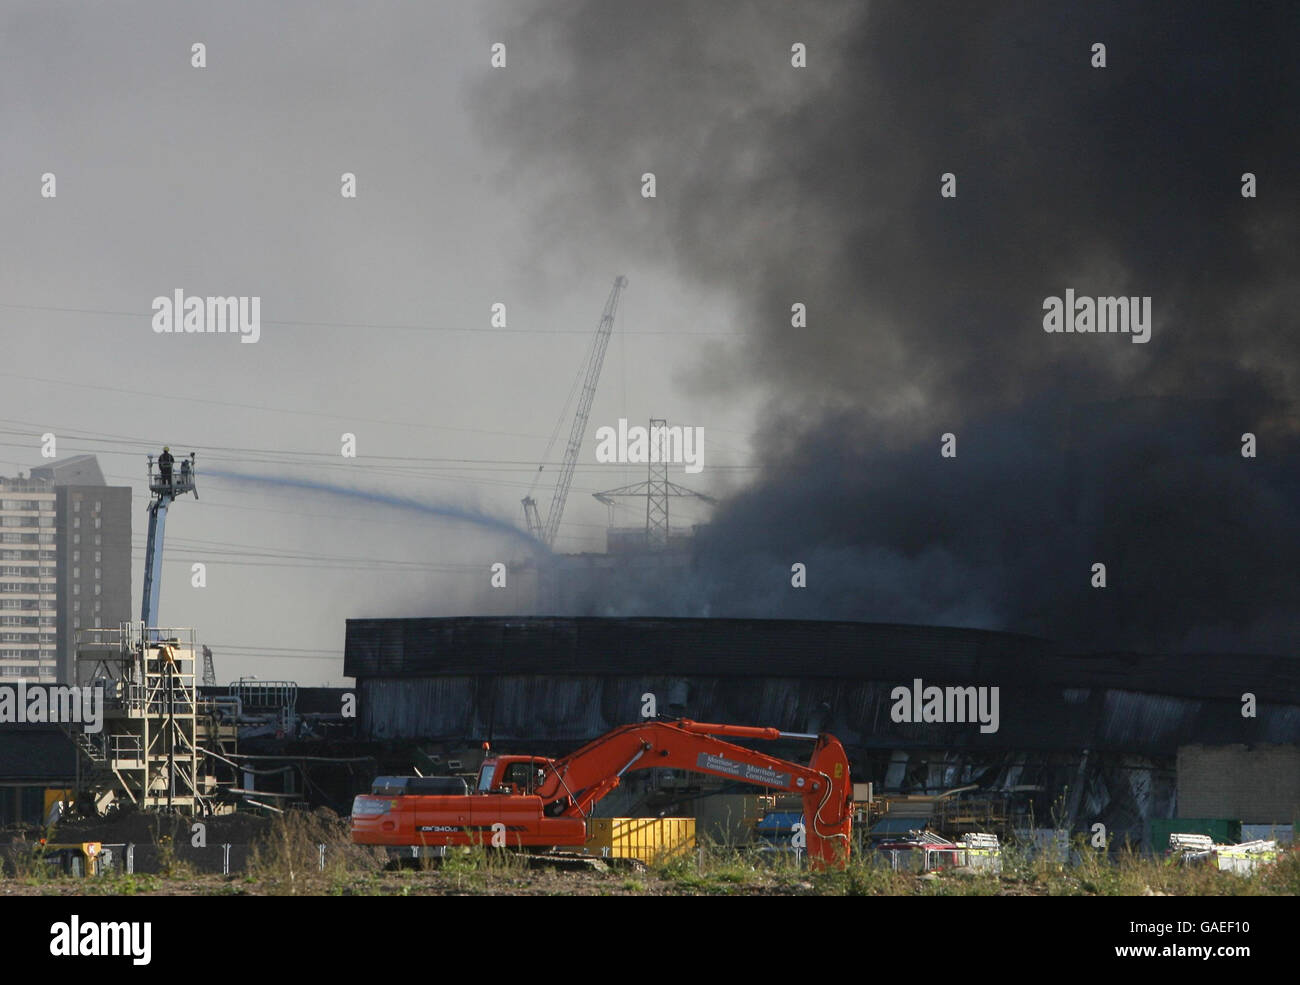 Fire in Stratford. Smoke bellows from a huge fire on the 2012 Olympic site in Stratford, east London. Stock Photo